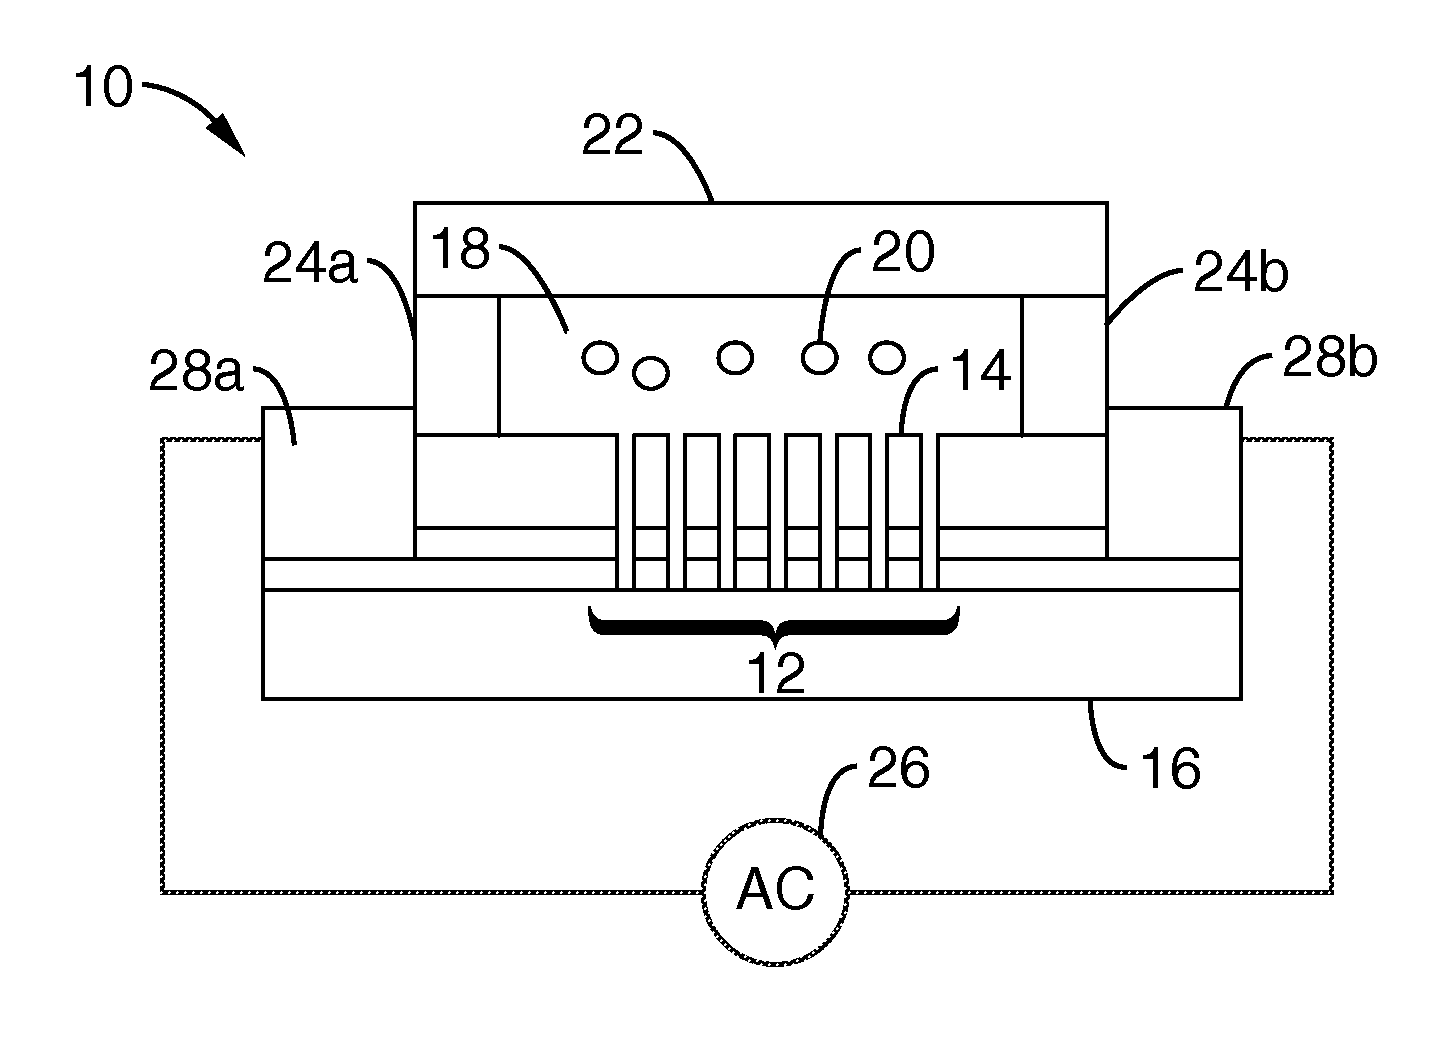 Single-sided lateral-field and phototransistor-based optoelectronic tweezers